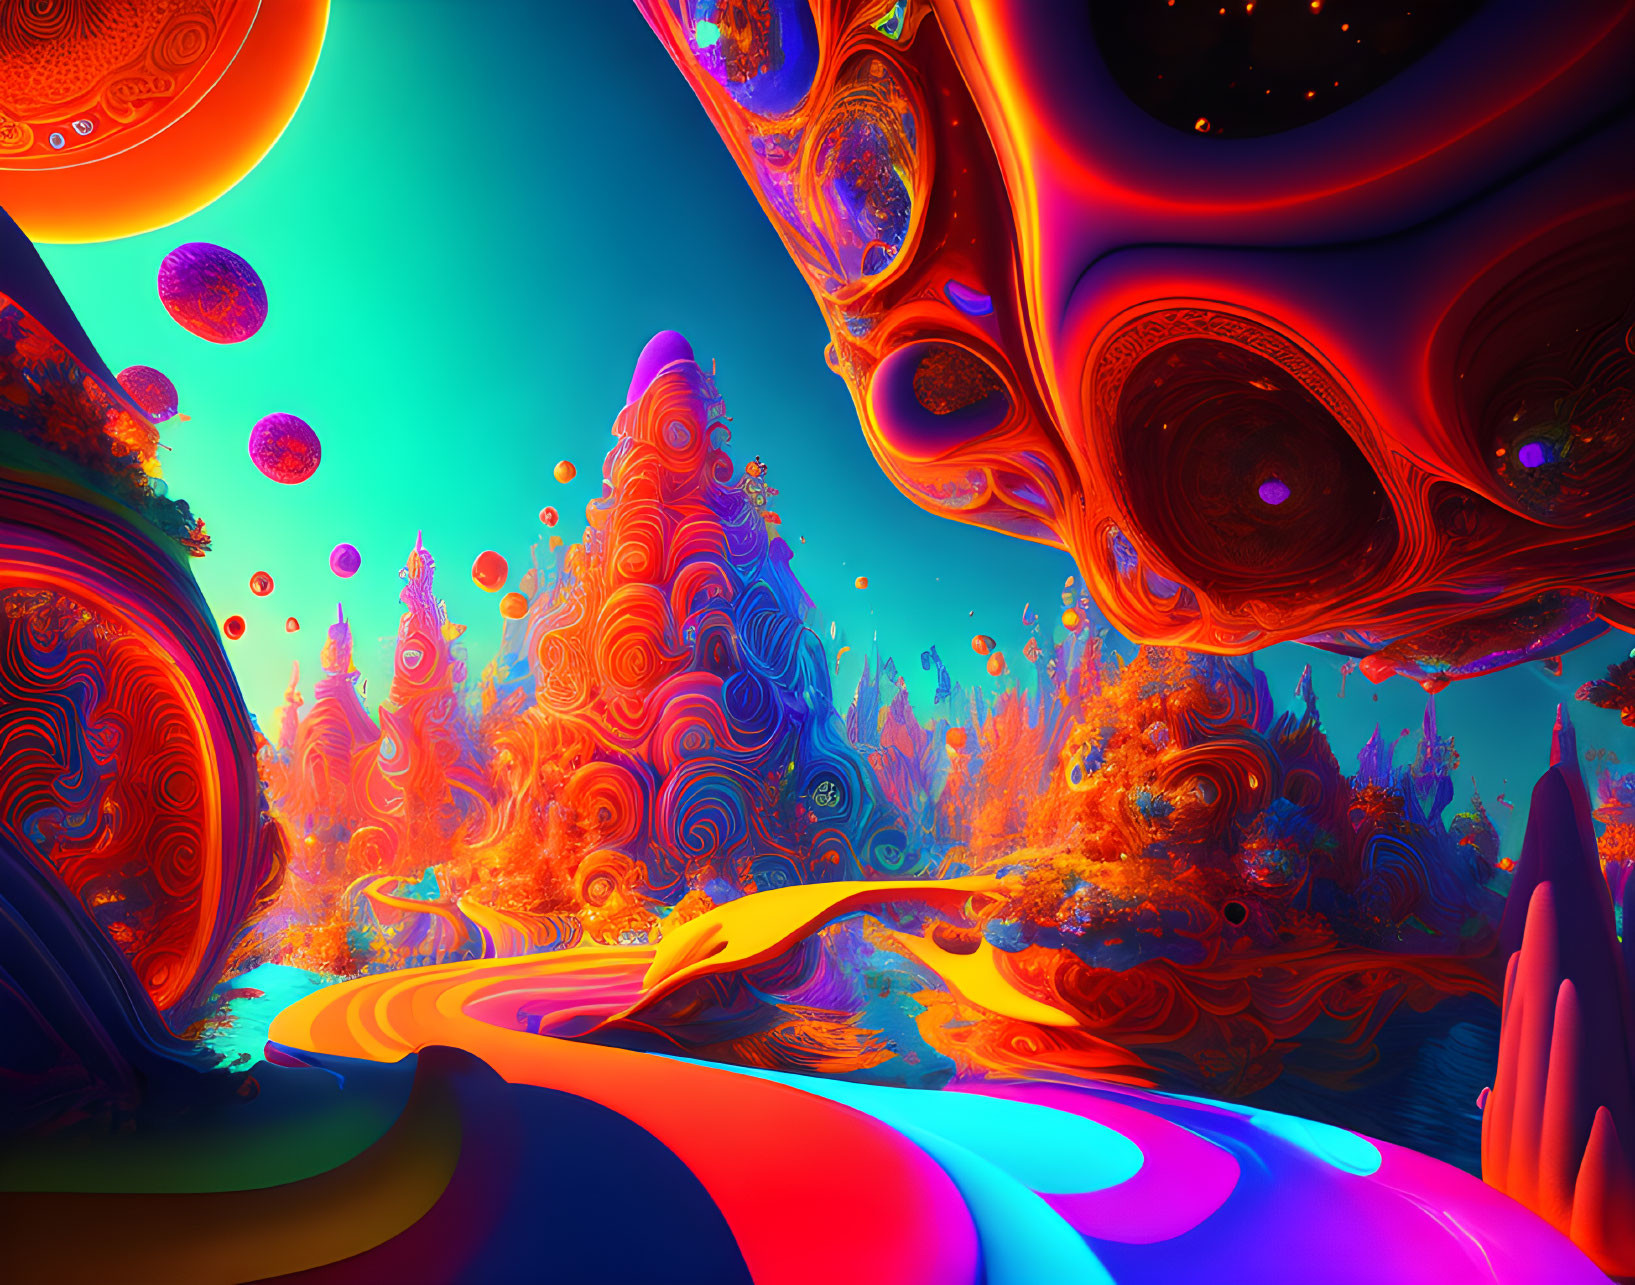 Colorful surreal landscape with swirling patterns and floating orbs